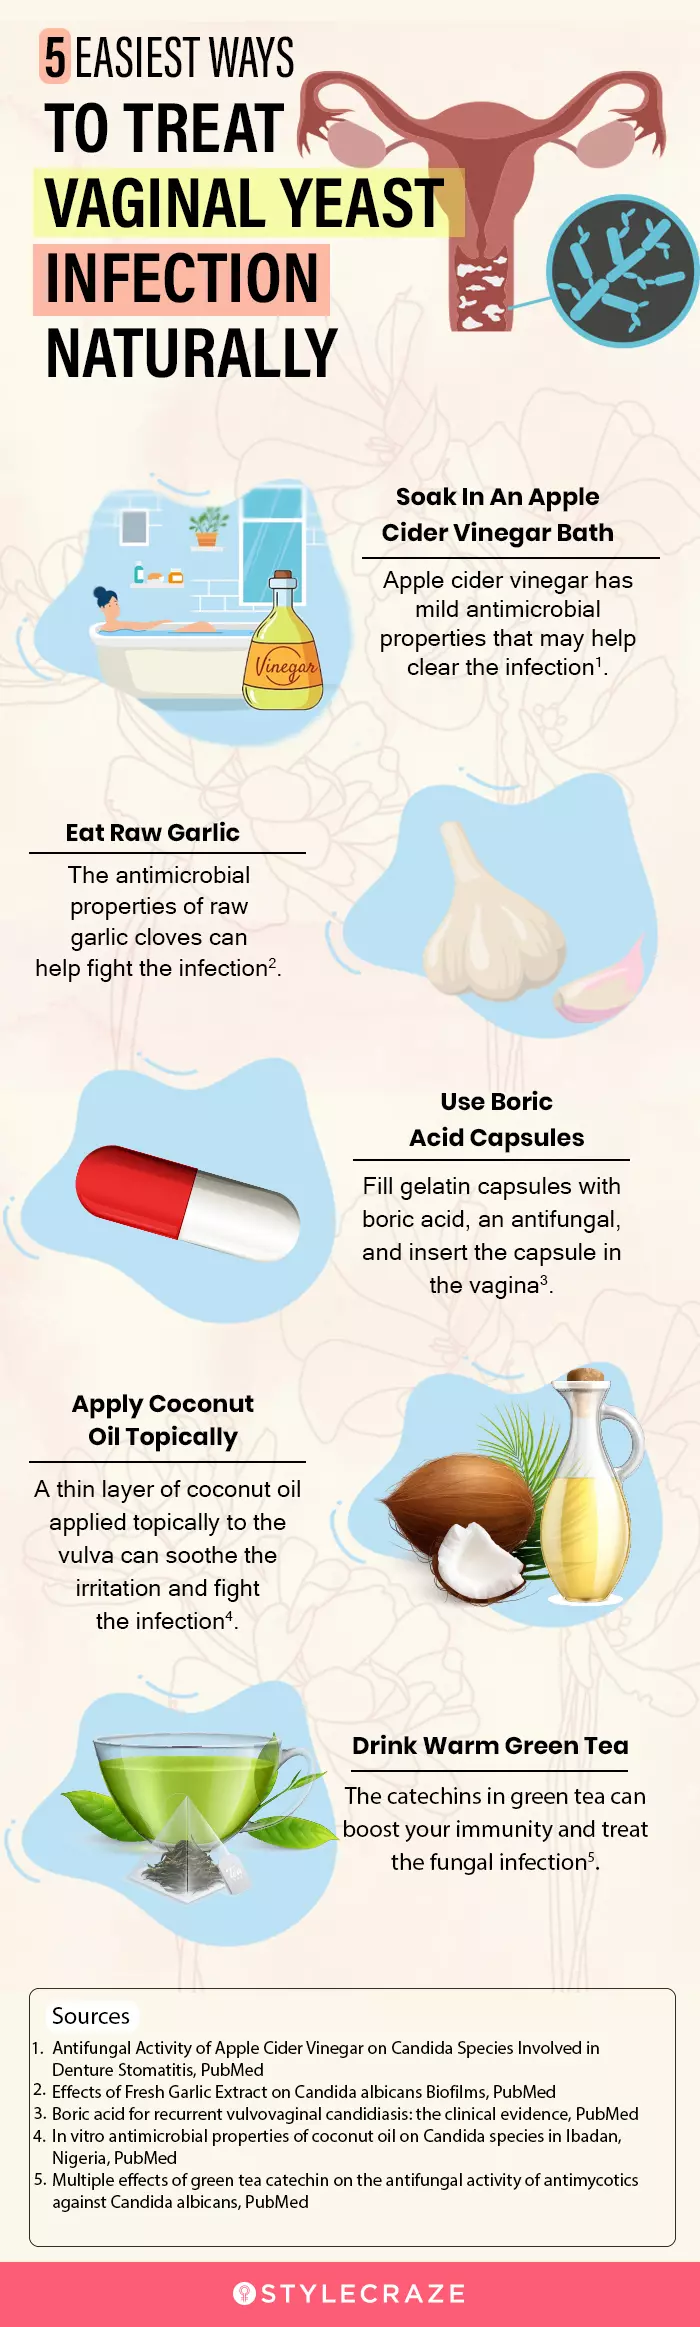 5 easiest ways to treat vaginal yeast infection naturally (infographic)